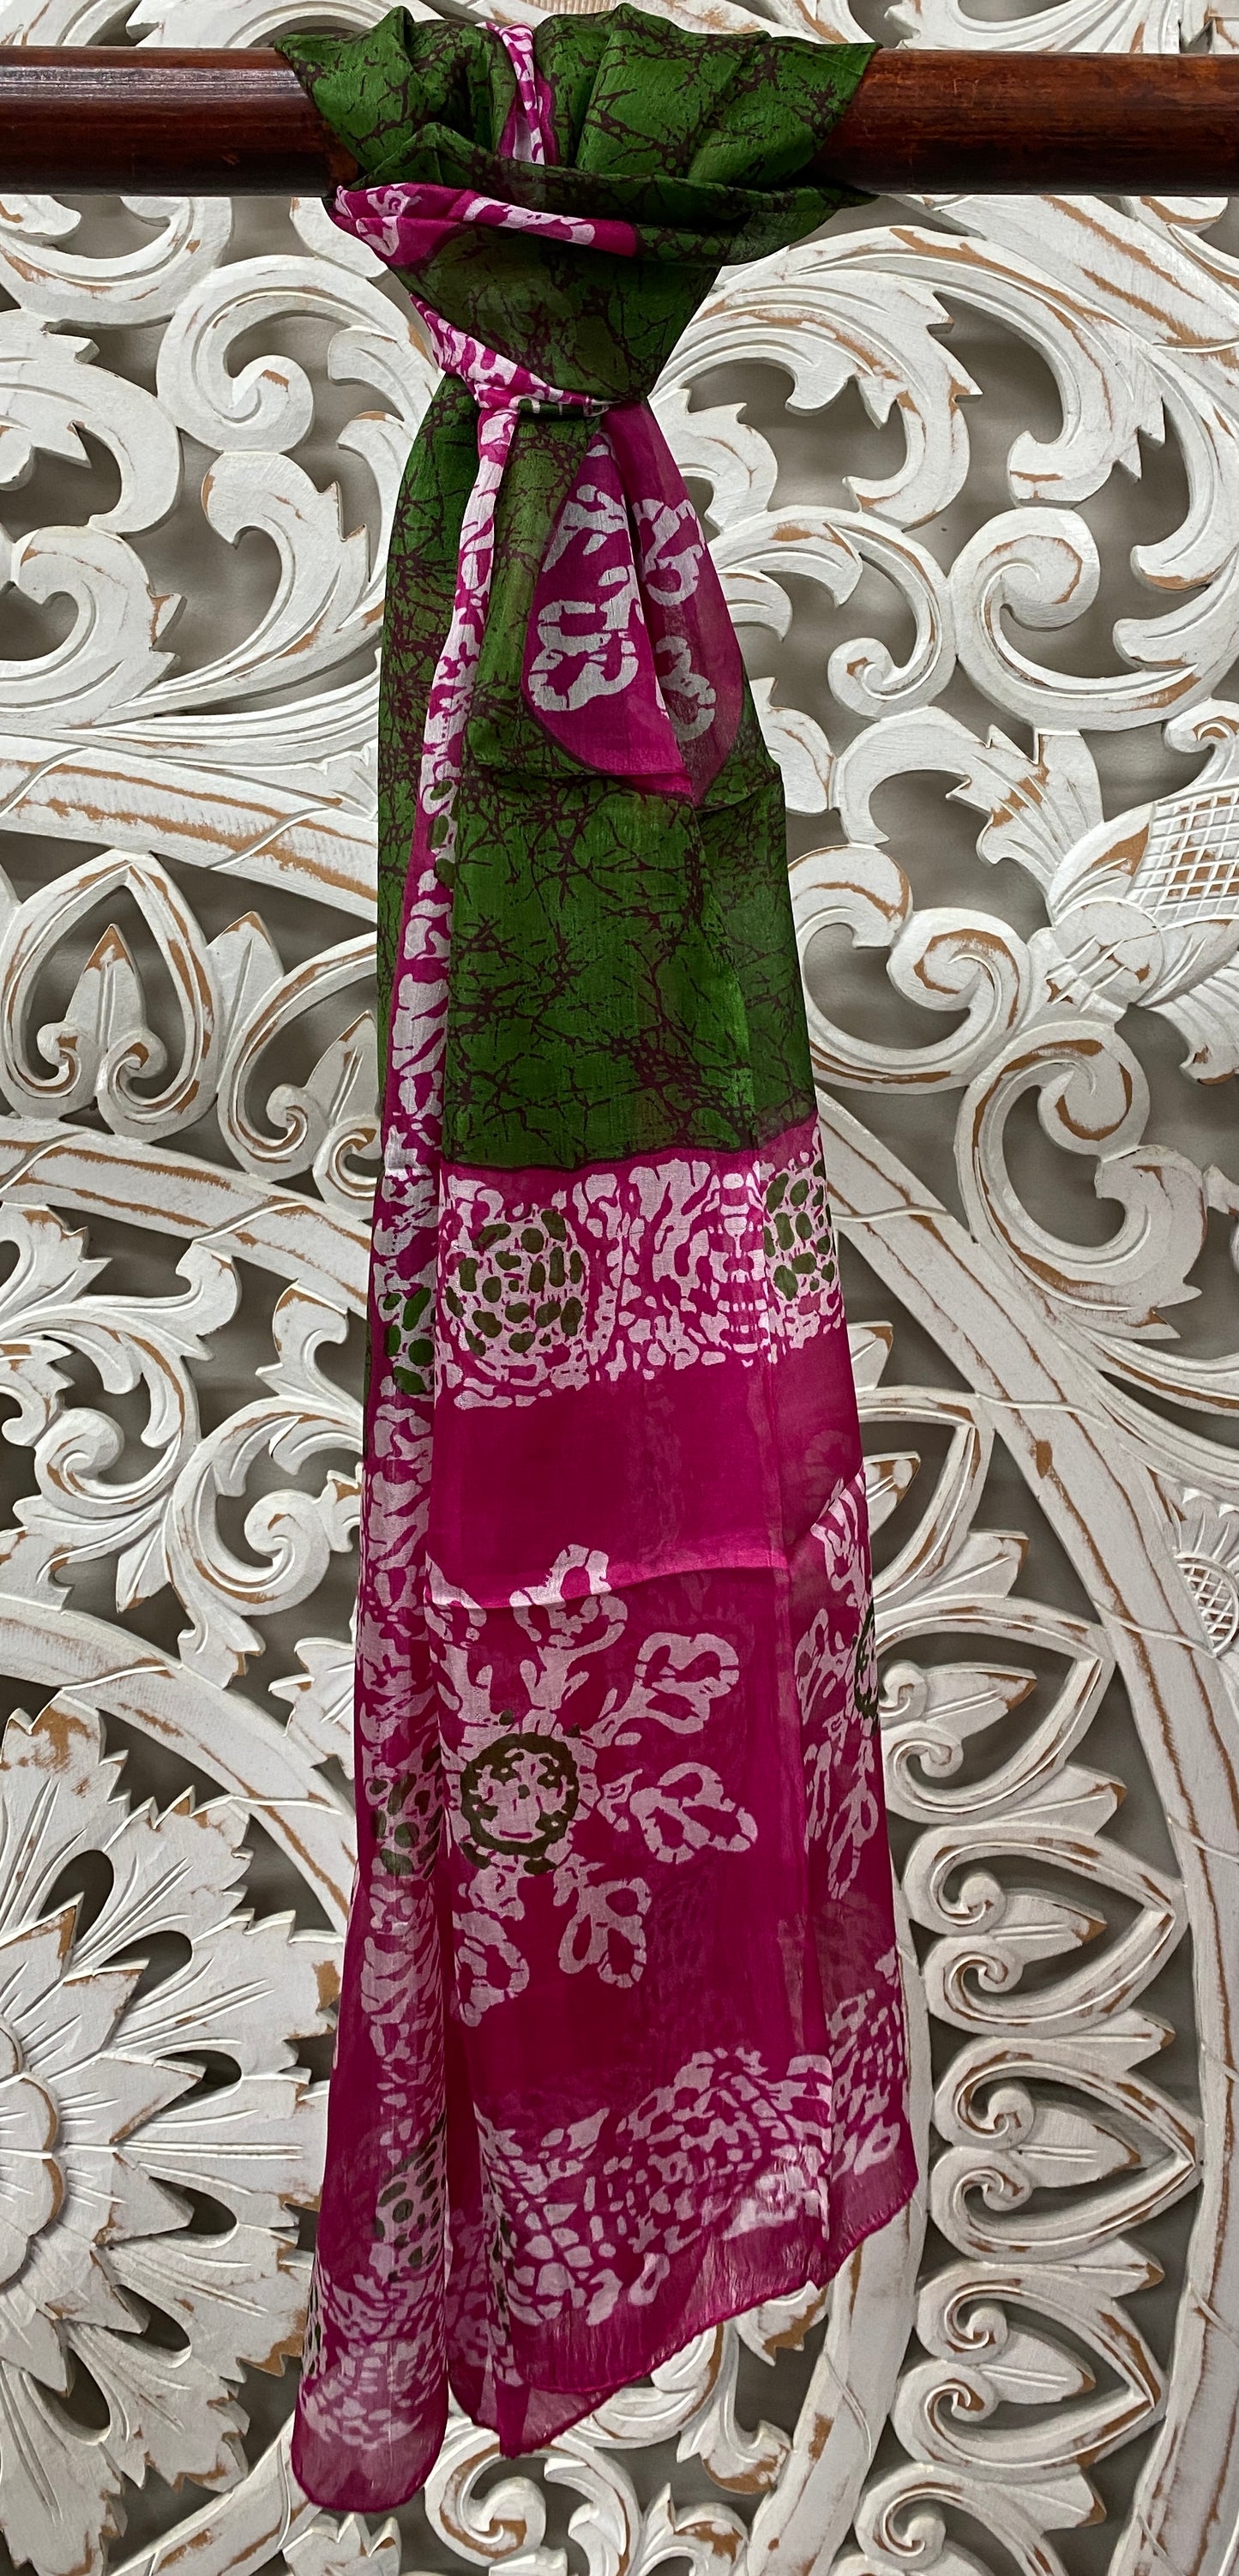 Super Soft 100% Silk Scarves - Available in 6 Colors